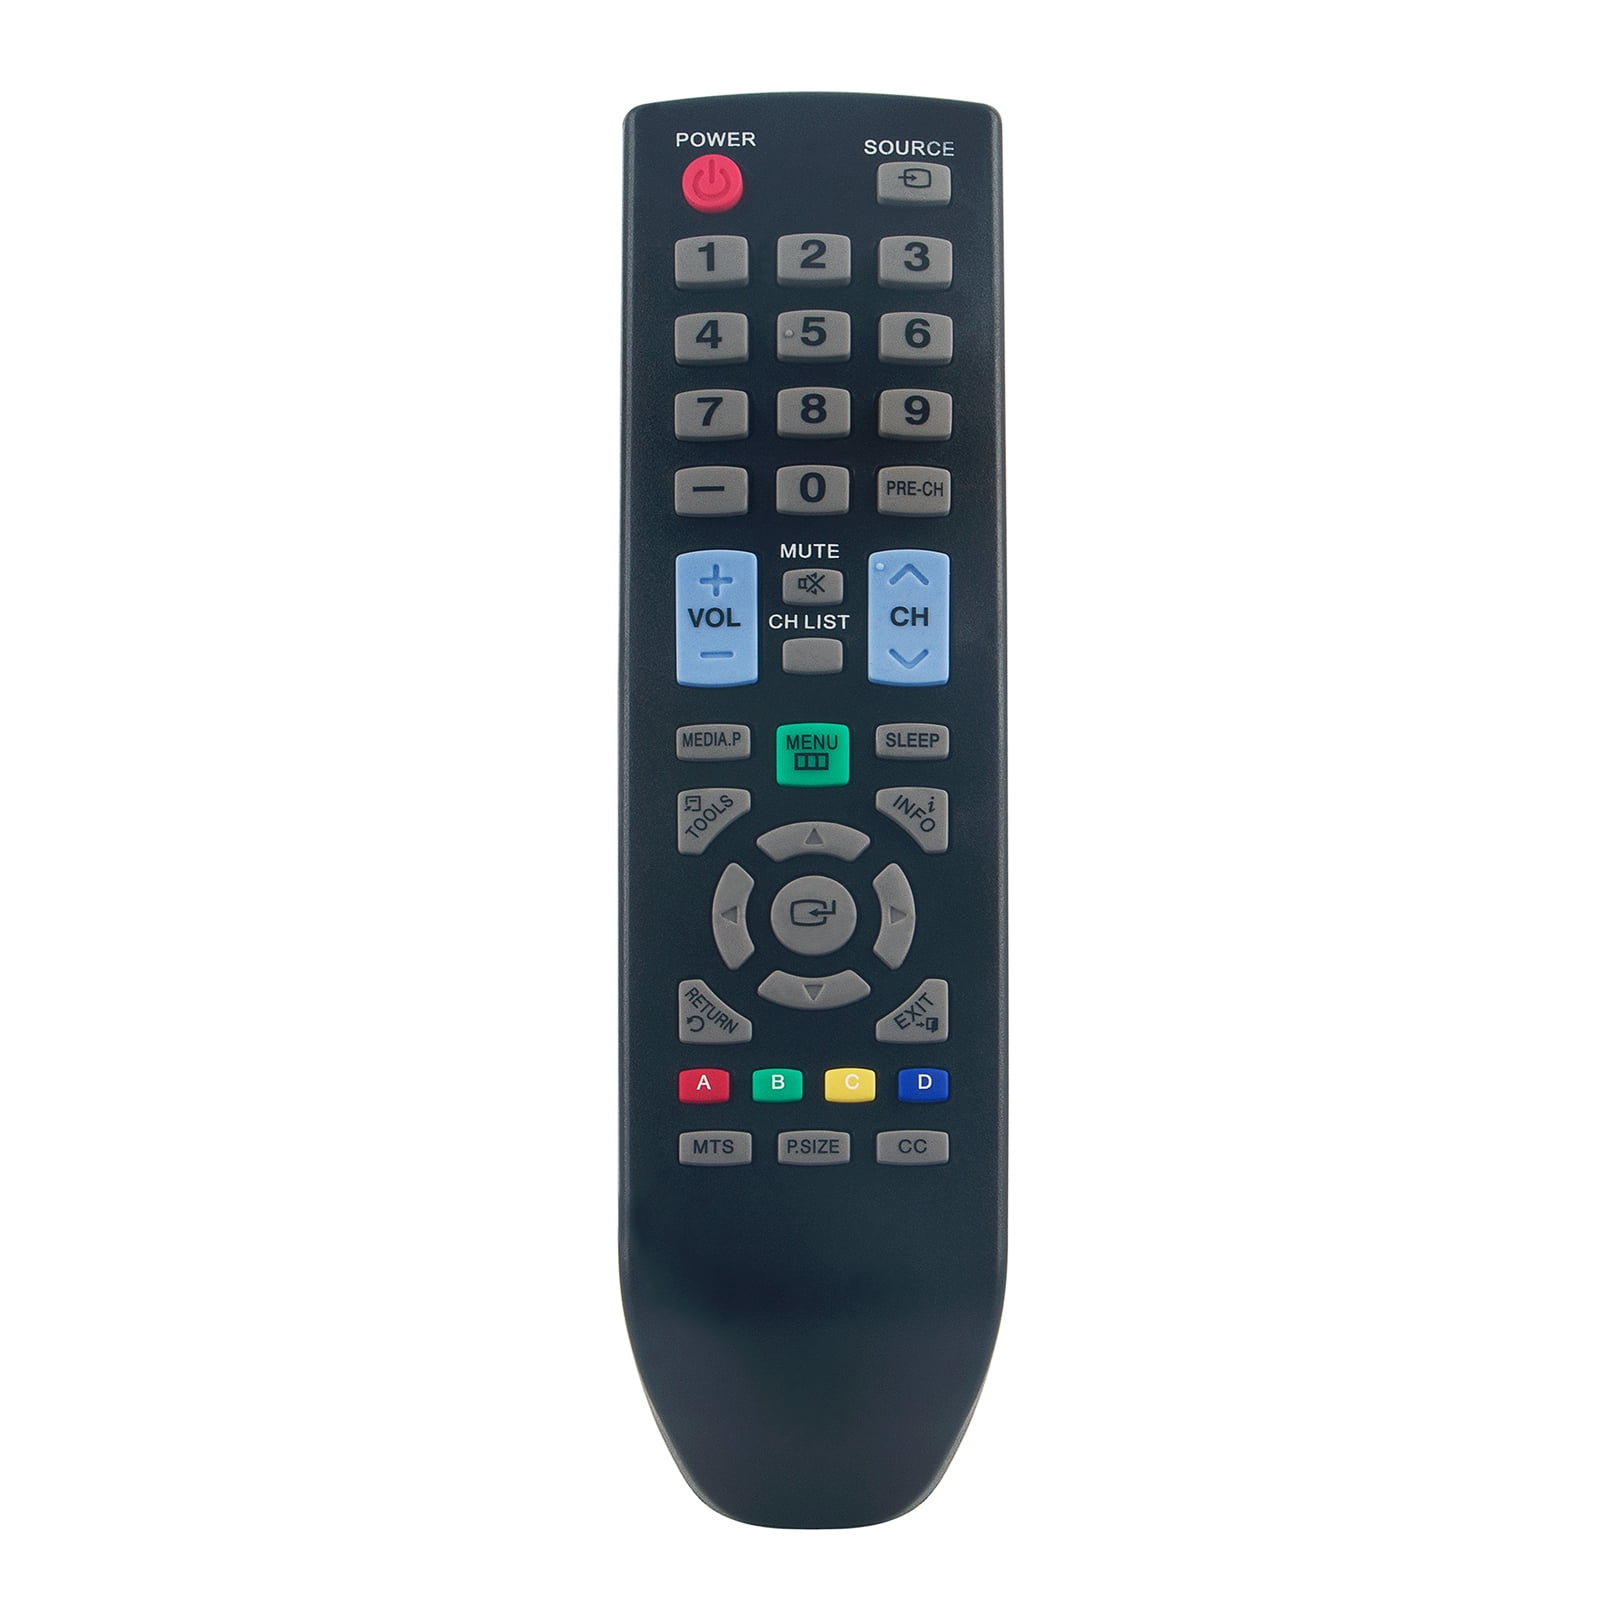  AA59-00543A TV Replace Remote Control for UE55D8000 PS51D8000FS  PS64D8000FS UE40D8000YS UE46D7000LSXXH UE46D8000 UE46D8000YSXXH UE55D7000  UE55D7000LS : Health & Household